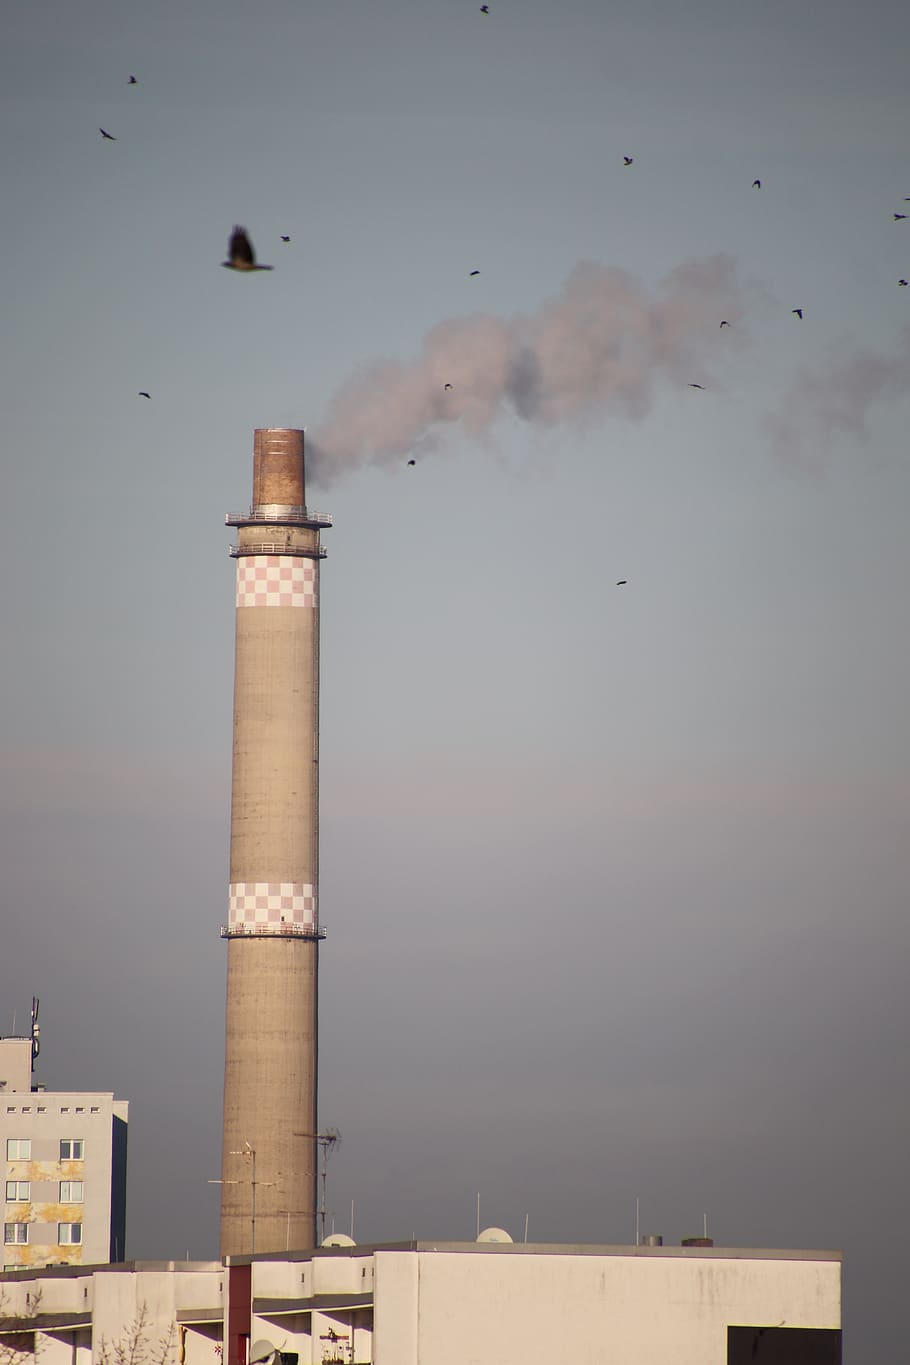 chimney, smoke, crow, dig, heat and power plant, industrial plant, industry, pollution, power plant, sky